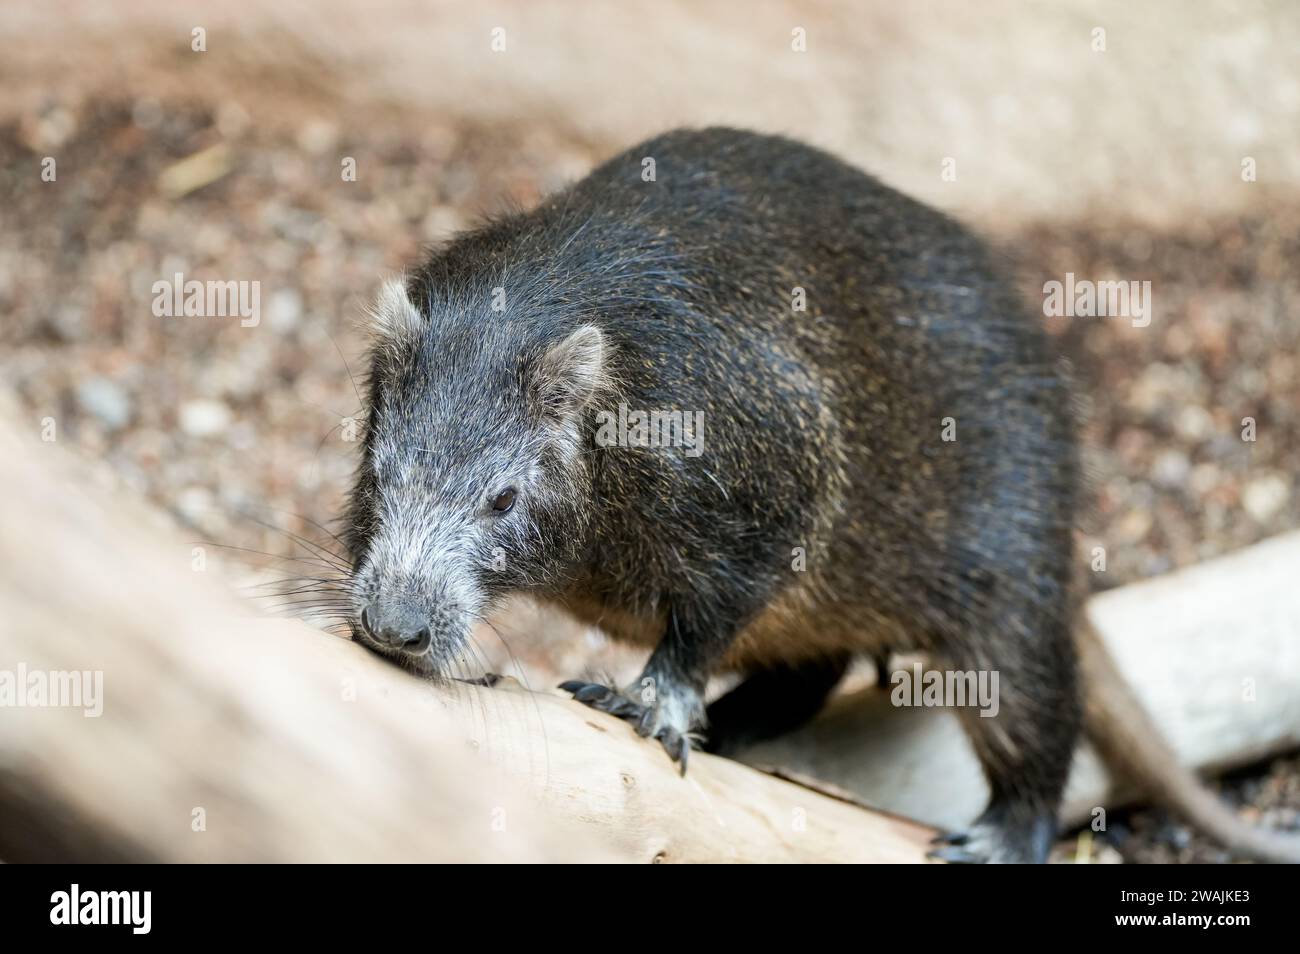 Portrait of a rodent. Animal in close-up. Stock Photo